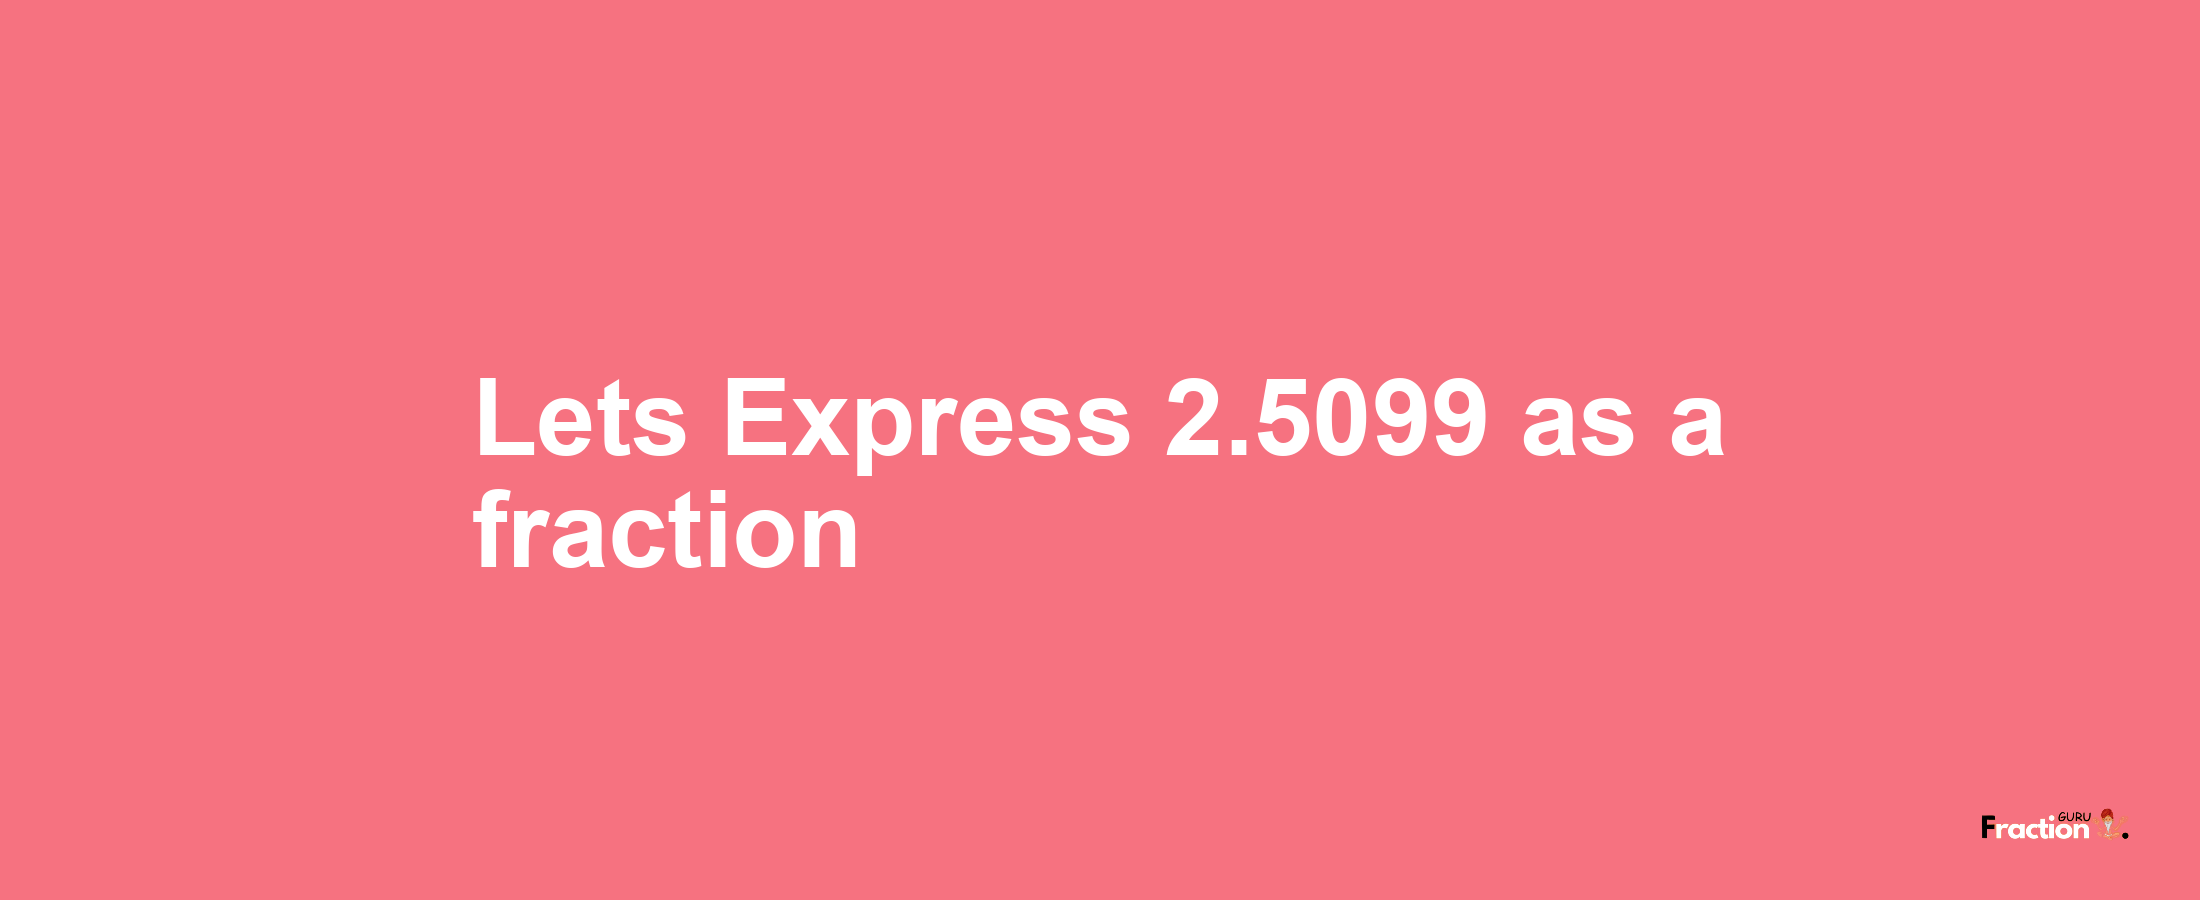 Lets Express 2.5099 as afraction